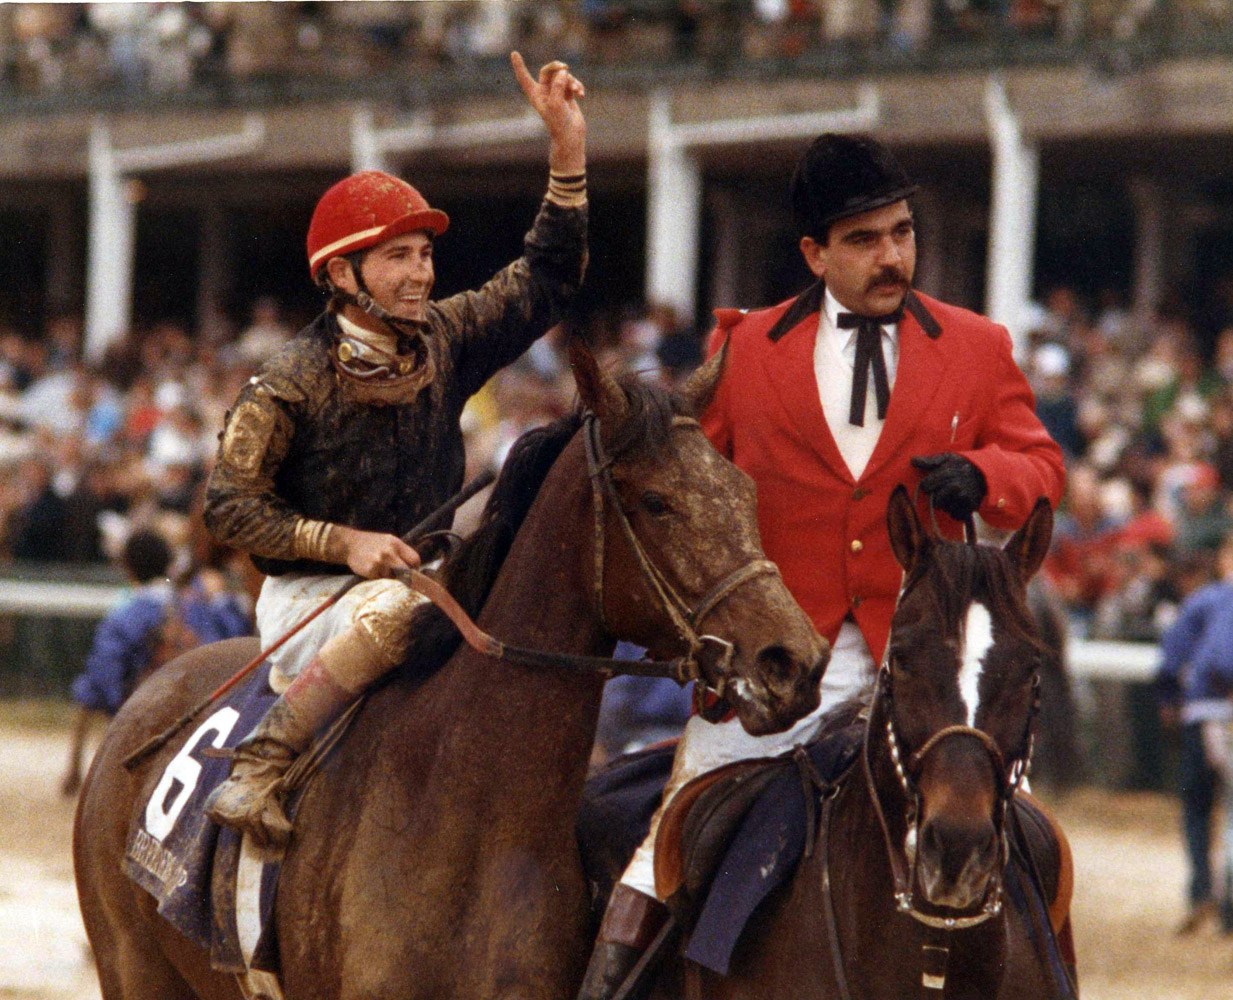 Personal Ensign (Randy Romero up) after winning the 1988 Breeders' Cup Distaff, her final career race (Museum Collection)